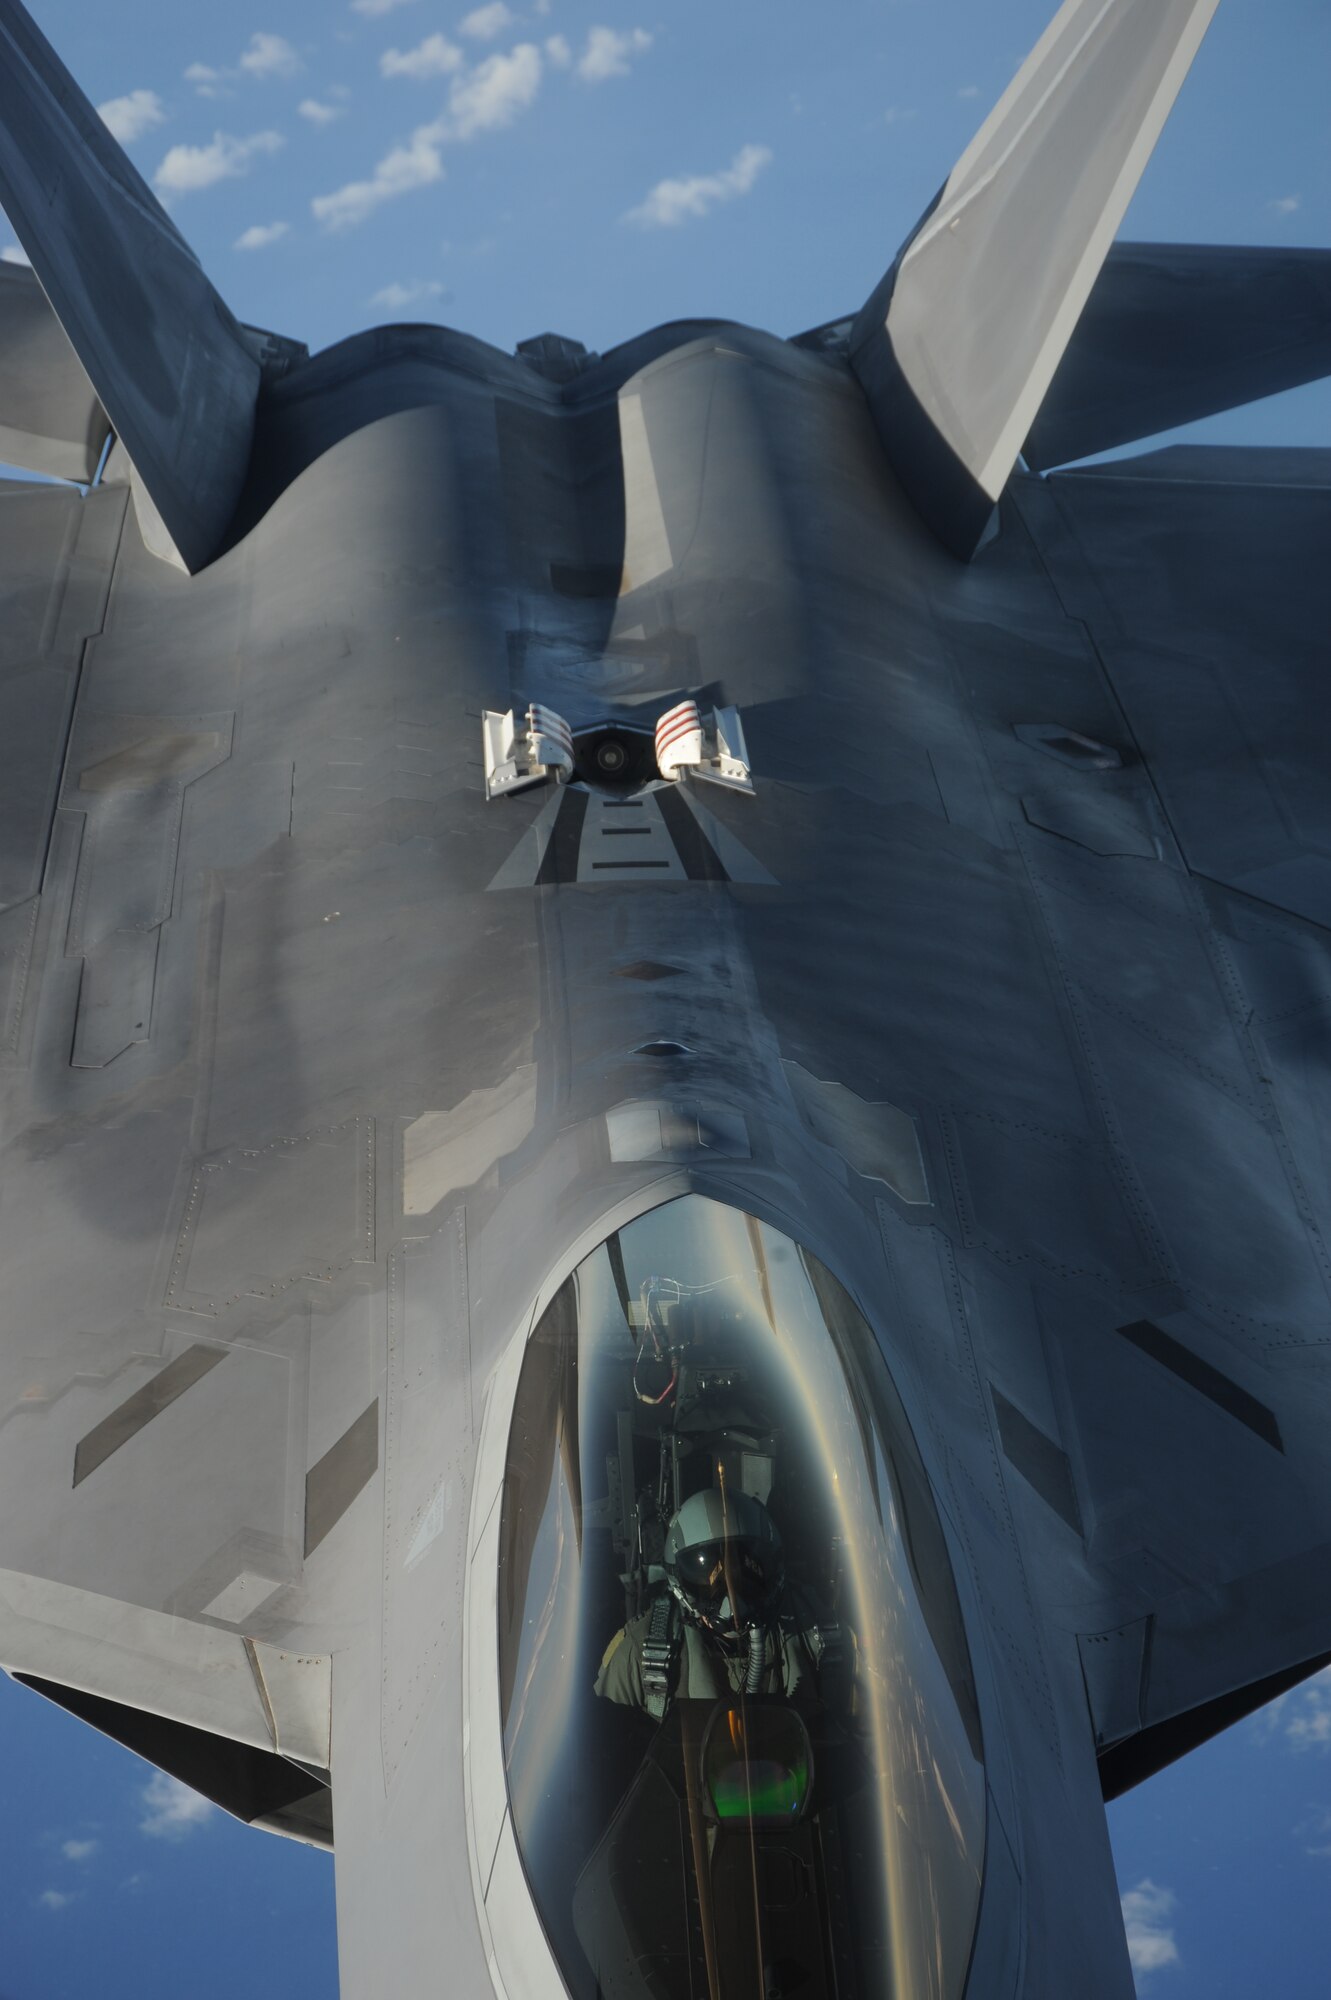 An F-22 Raptor moves into position to receive fuel from a KC-135 Stratotanker over the Pacific Ocean Jan. 28 The Raptors are deployed from Elmendorf Air Force Base, Alaska to the 90th Expeditionary Fighter Squadron Andersen Air Force Base, Guam. The stealth-fighters, along with associated maintenance and support personnel will participate in various exercises that provide routine training in an environment different from their home station. The F-22 is a highly maneuverable combat aircraft that can avoid enemy detection, cruise at supersonic speeds, and provide the joint force commander an unprecedented level of integrated situational awareness.(U.S. Air Force photo/ Master Sgt. Kevin J. Gruenwald) released 